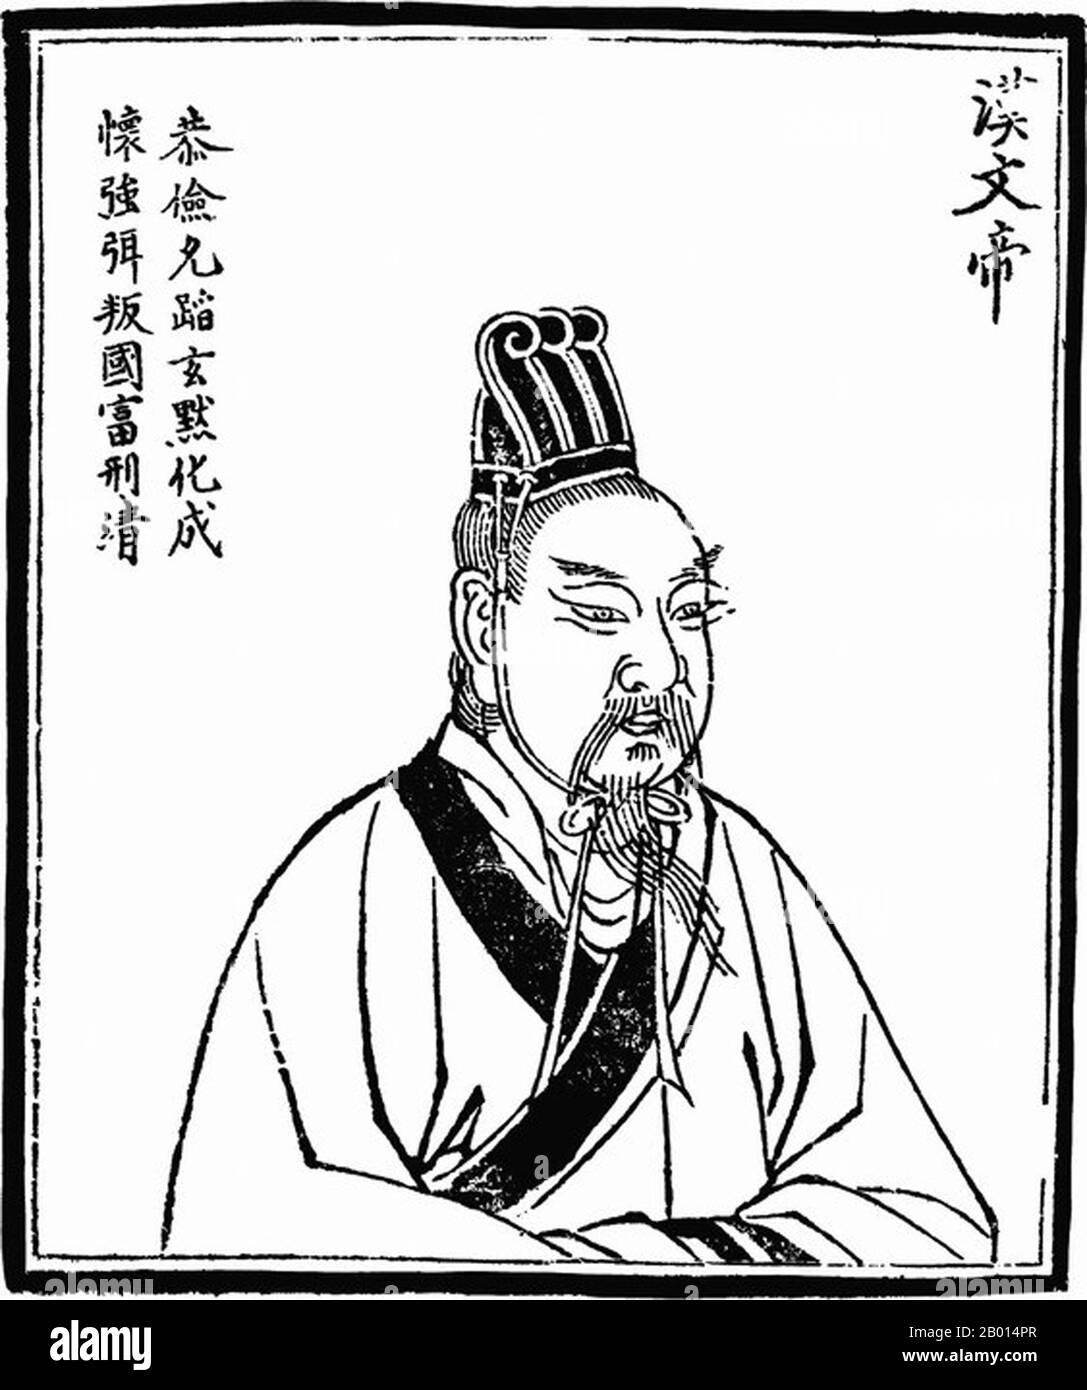 China: Emperor Wen (202 BCE – 157 BCE), fifth emperor of the Western Han Dynasty (r.180-157 BCE). Illustration, c. 1498.  Emperor Wen of Han, personal name Liu Heng and temple name Taizong, was the fifth emperor of the Han Dynasty in China. In a move of lasting importance in 165 BCE, Emperor Wen introduced recruitment to the civil service through examinations. Previously, potential officials never sat for any sort of academic examinations. Their names were sent by local officials to the central government based on reputations and abilities, which were sometimes judged subjectively. Stock Photo